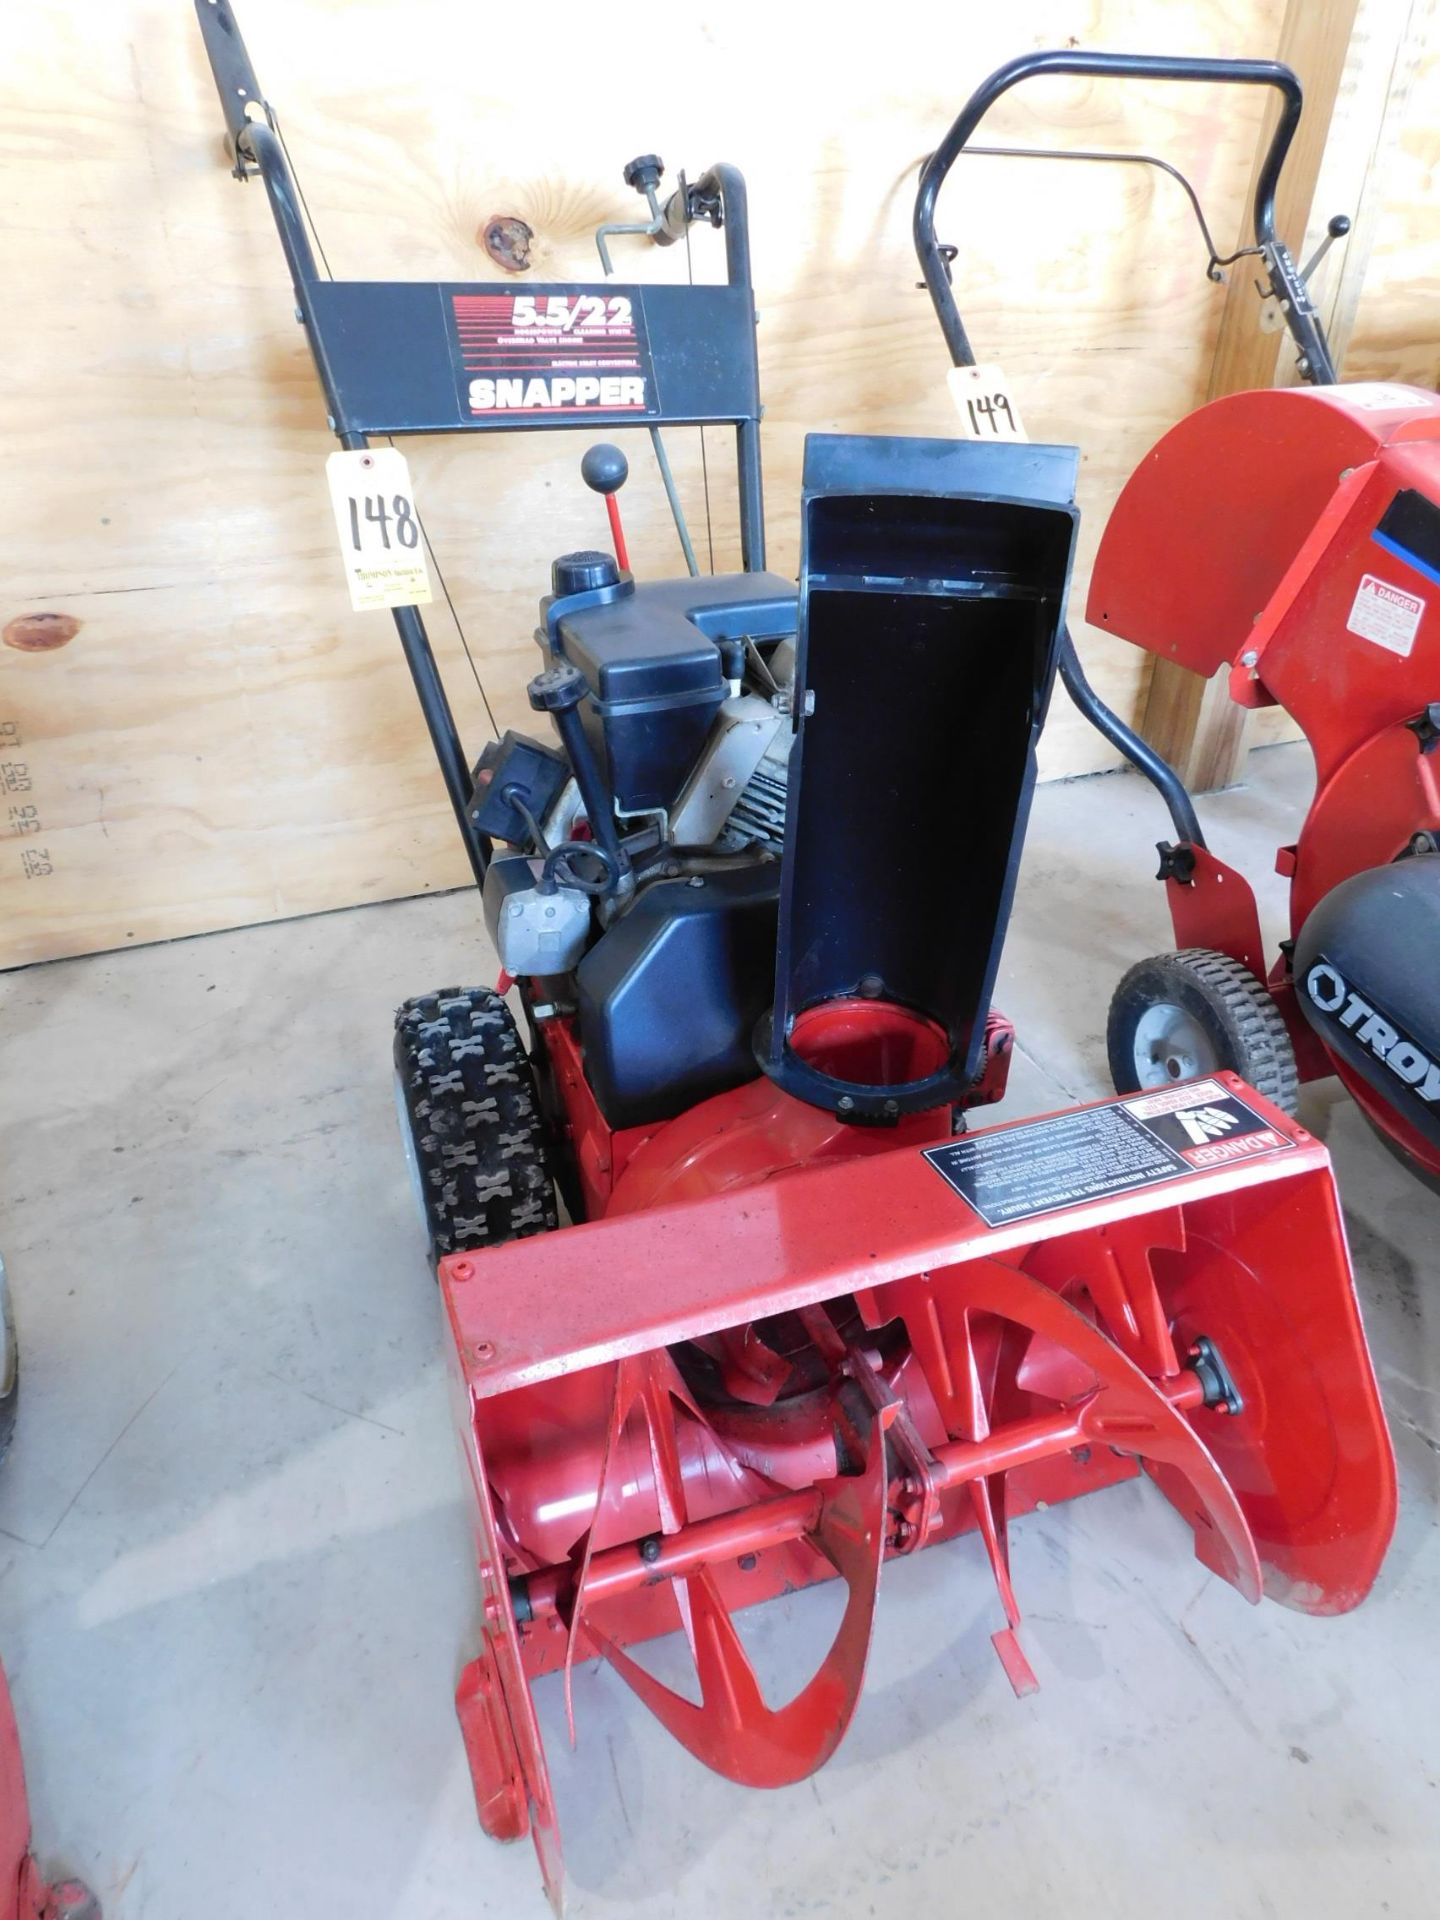 Snapper 5.5hp/22" Gas Powered Snow Blower